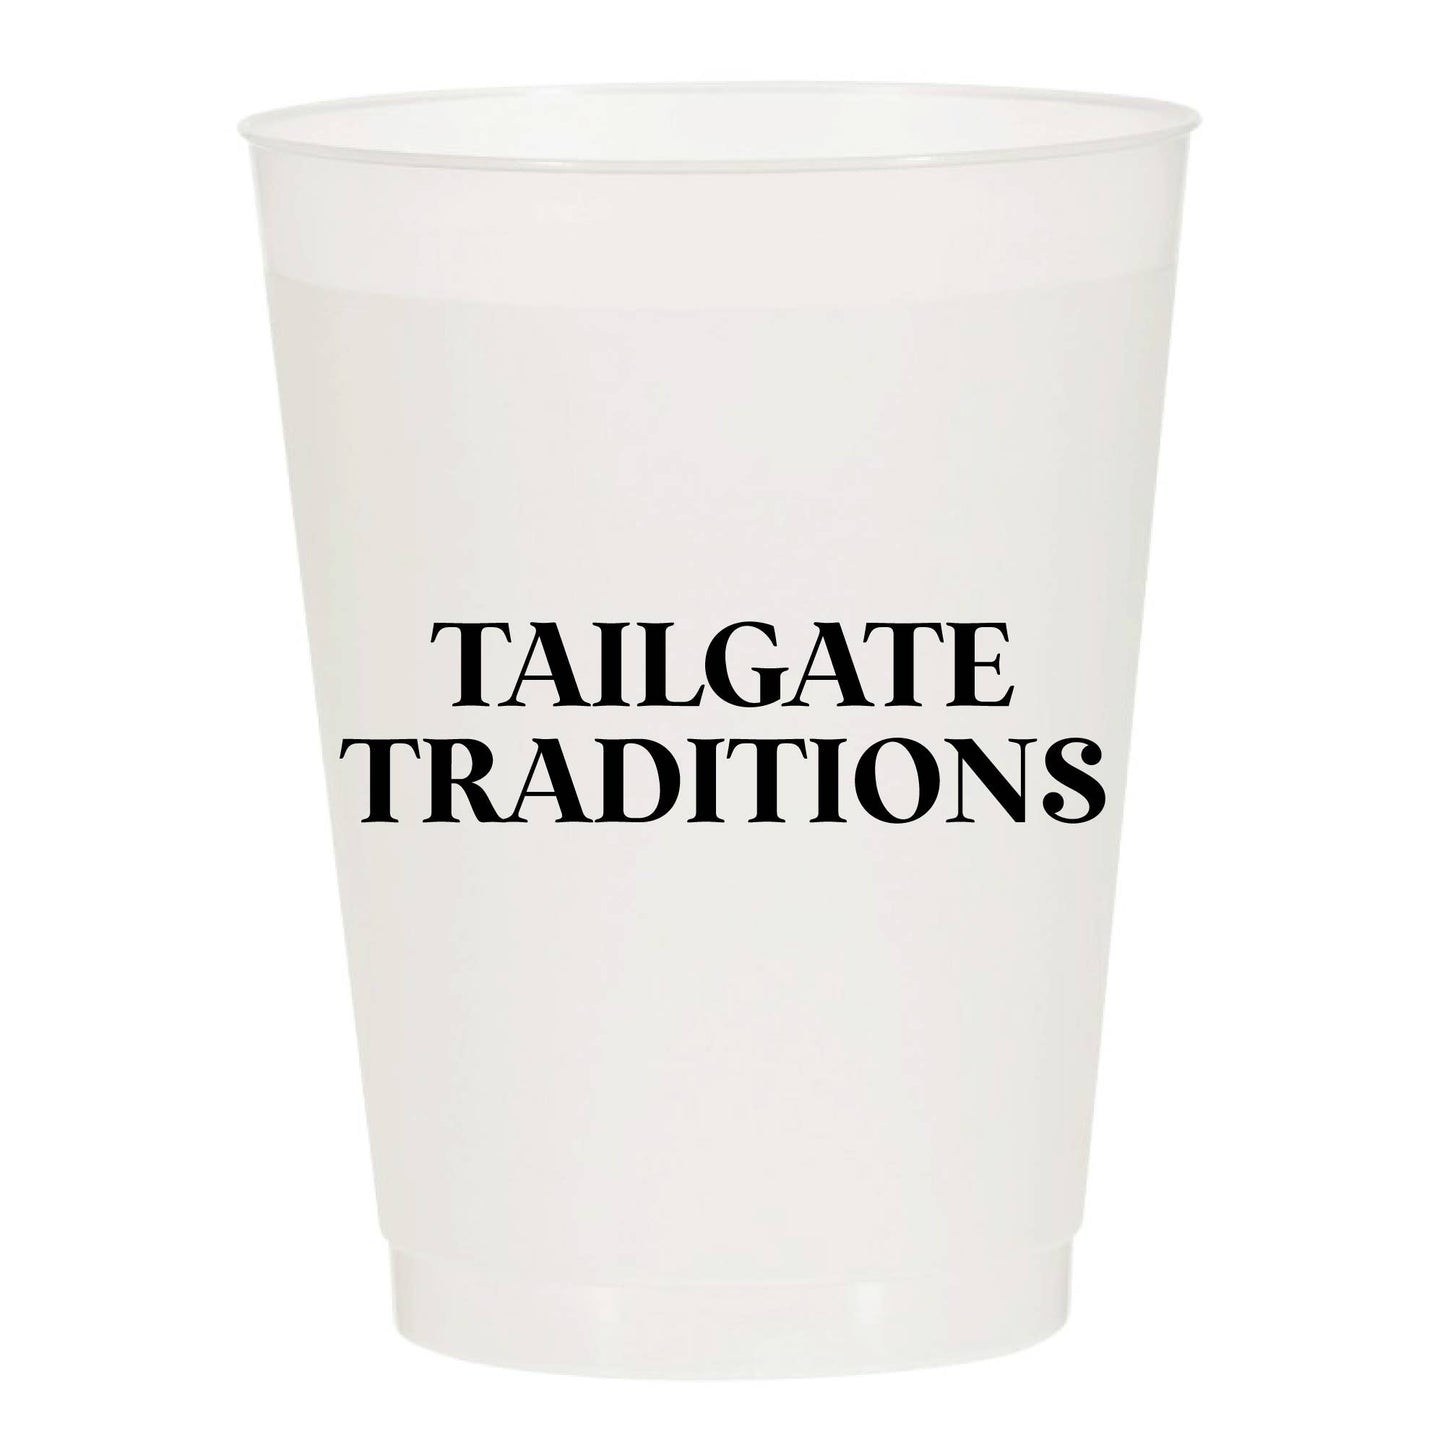 Tailgate Traditions Football Party - Set of 10 Reusable Cups